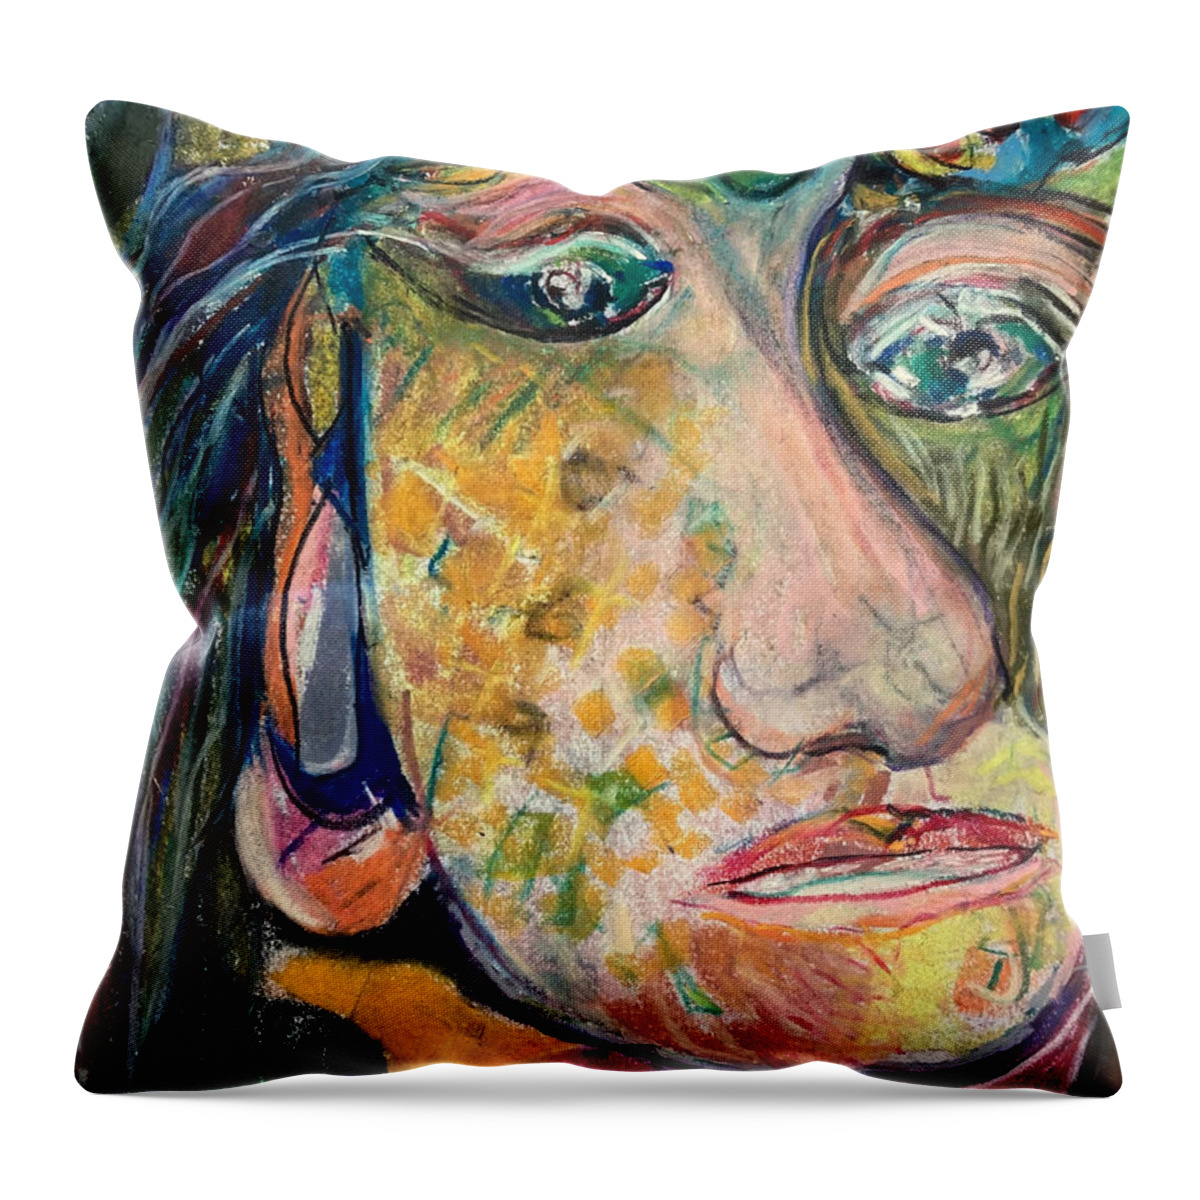 Hawaii Throw Pillow featuring the painting Chief by Oge